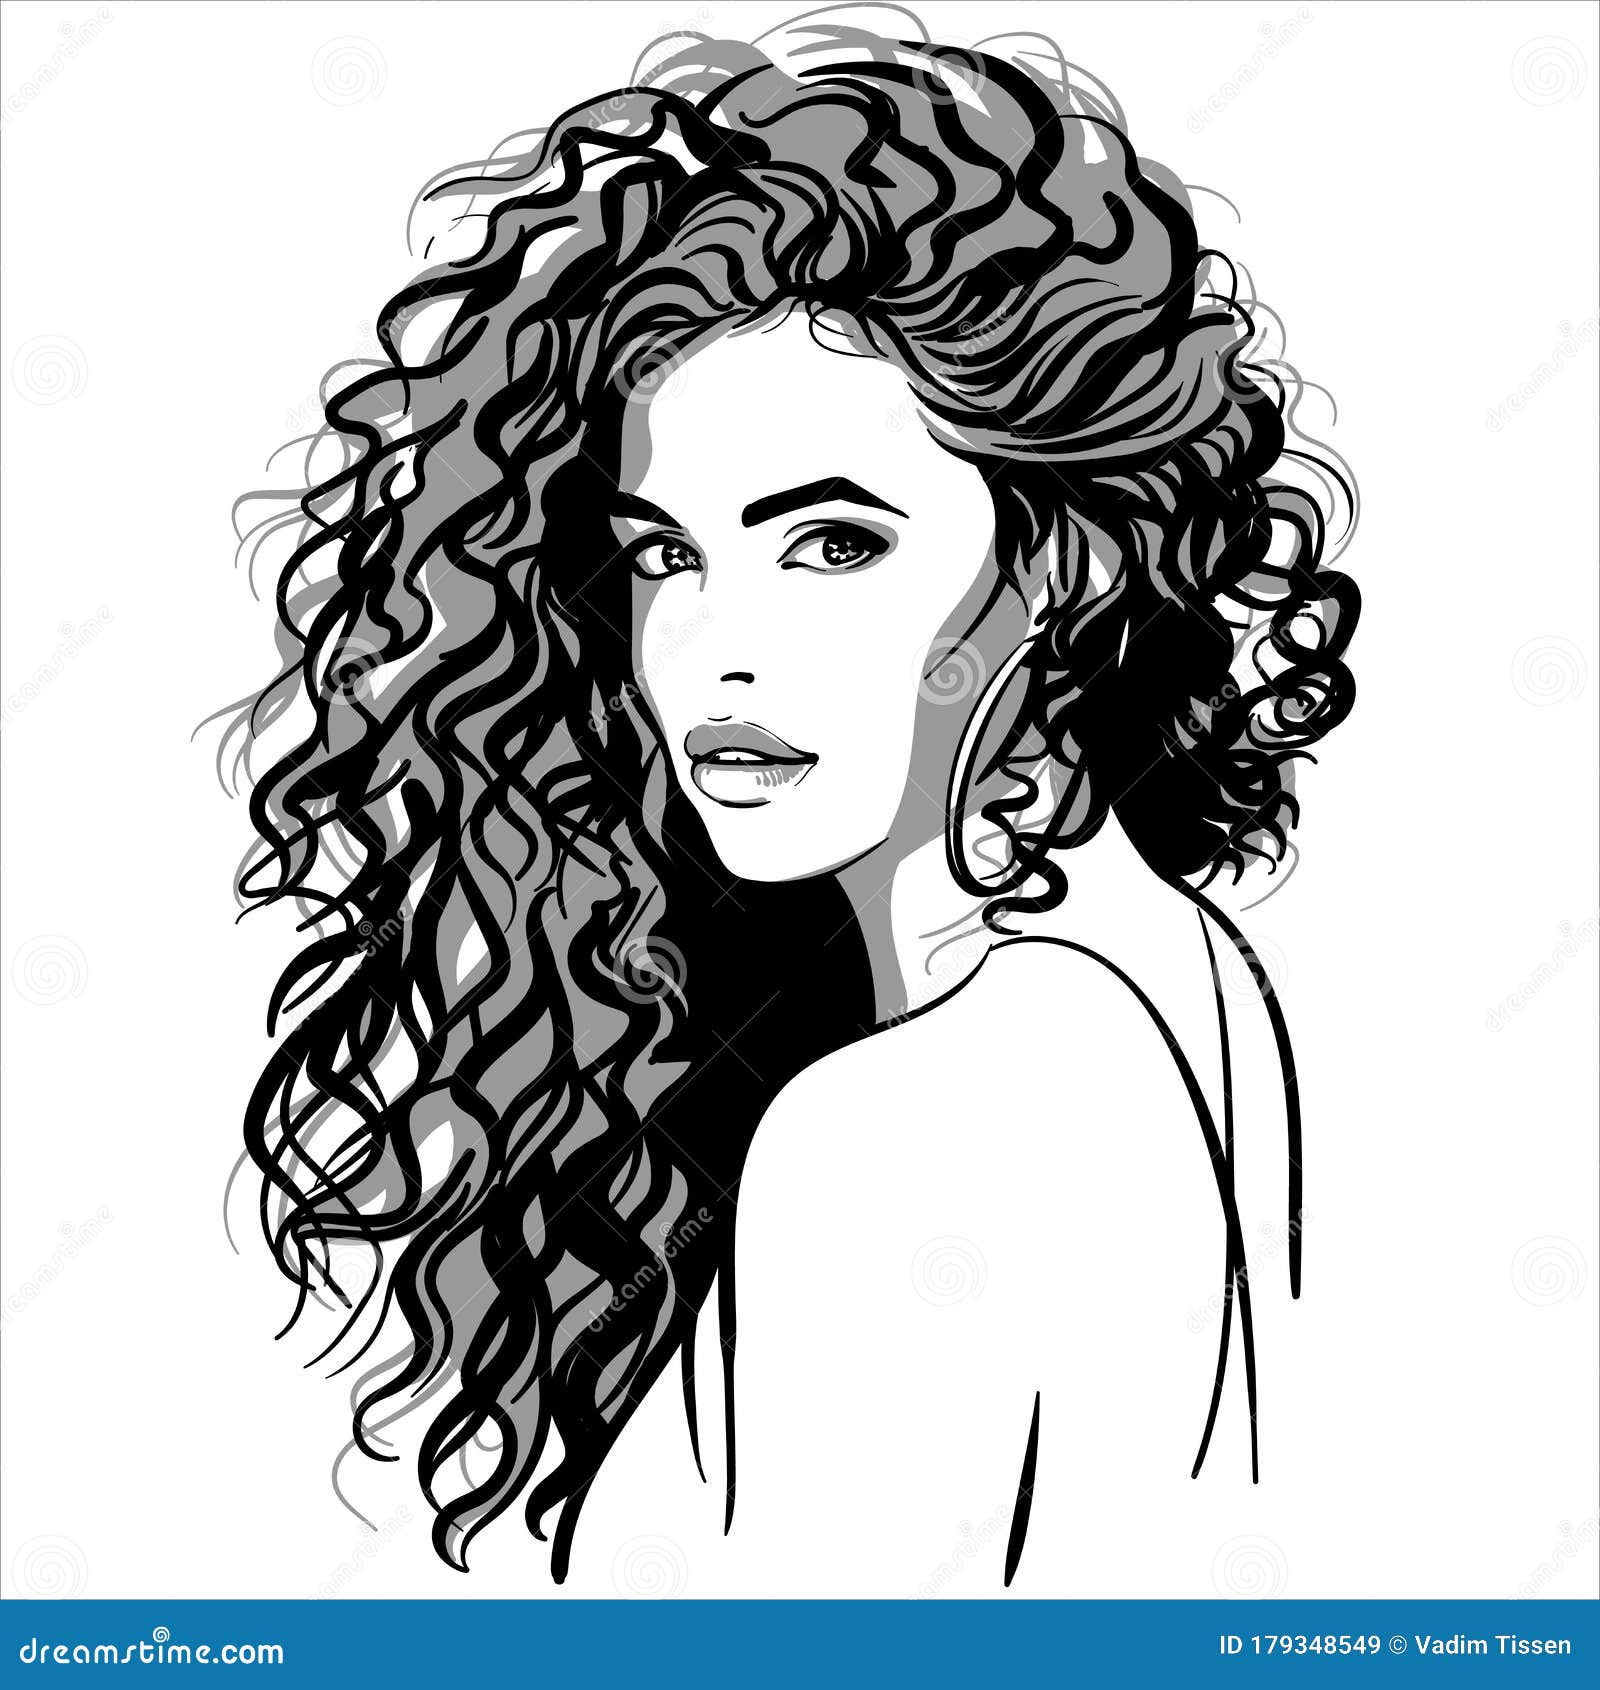 Art Sketch Of A Beautiful Woman With Curly Hair Concept Illustration  Royalty Free SVG Cliparts Vectors And Stock Illustration Image  184259527